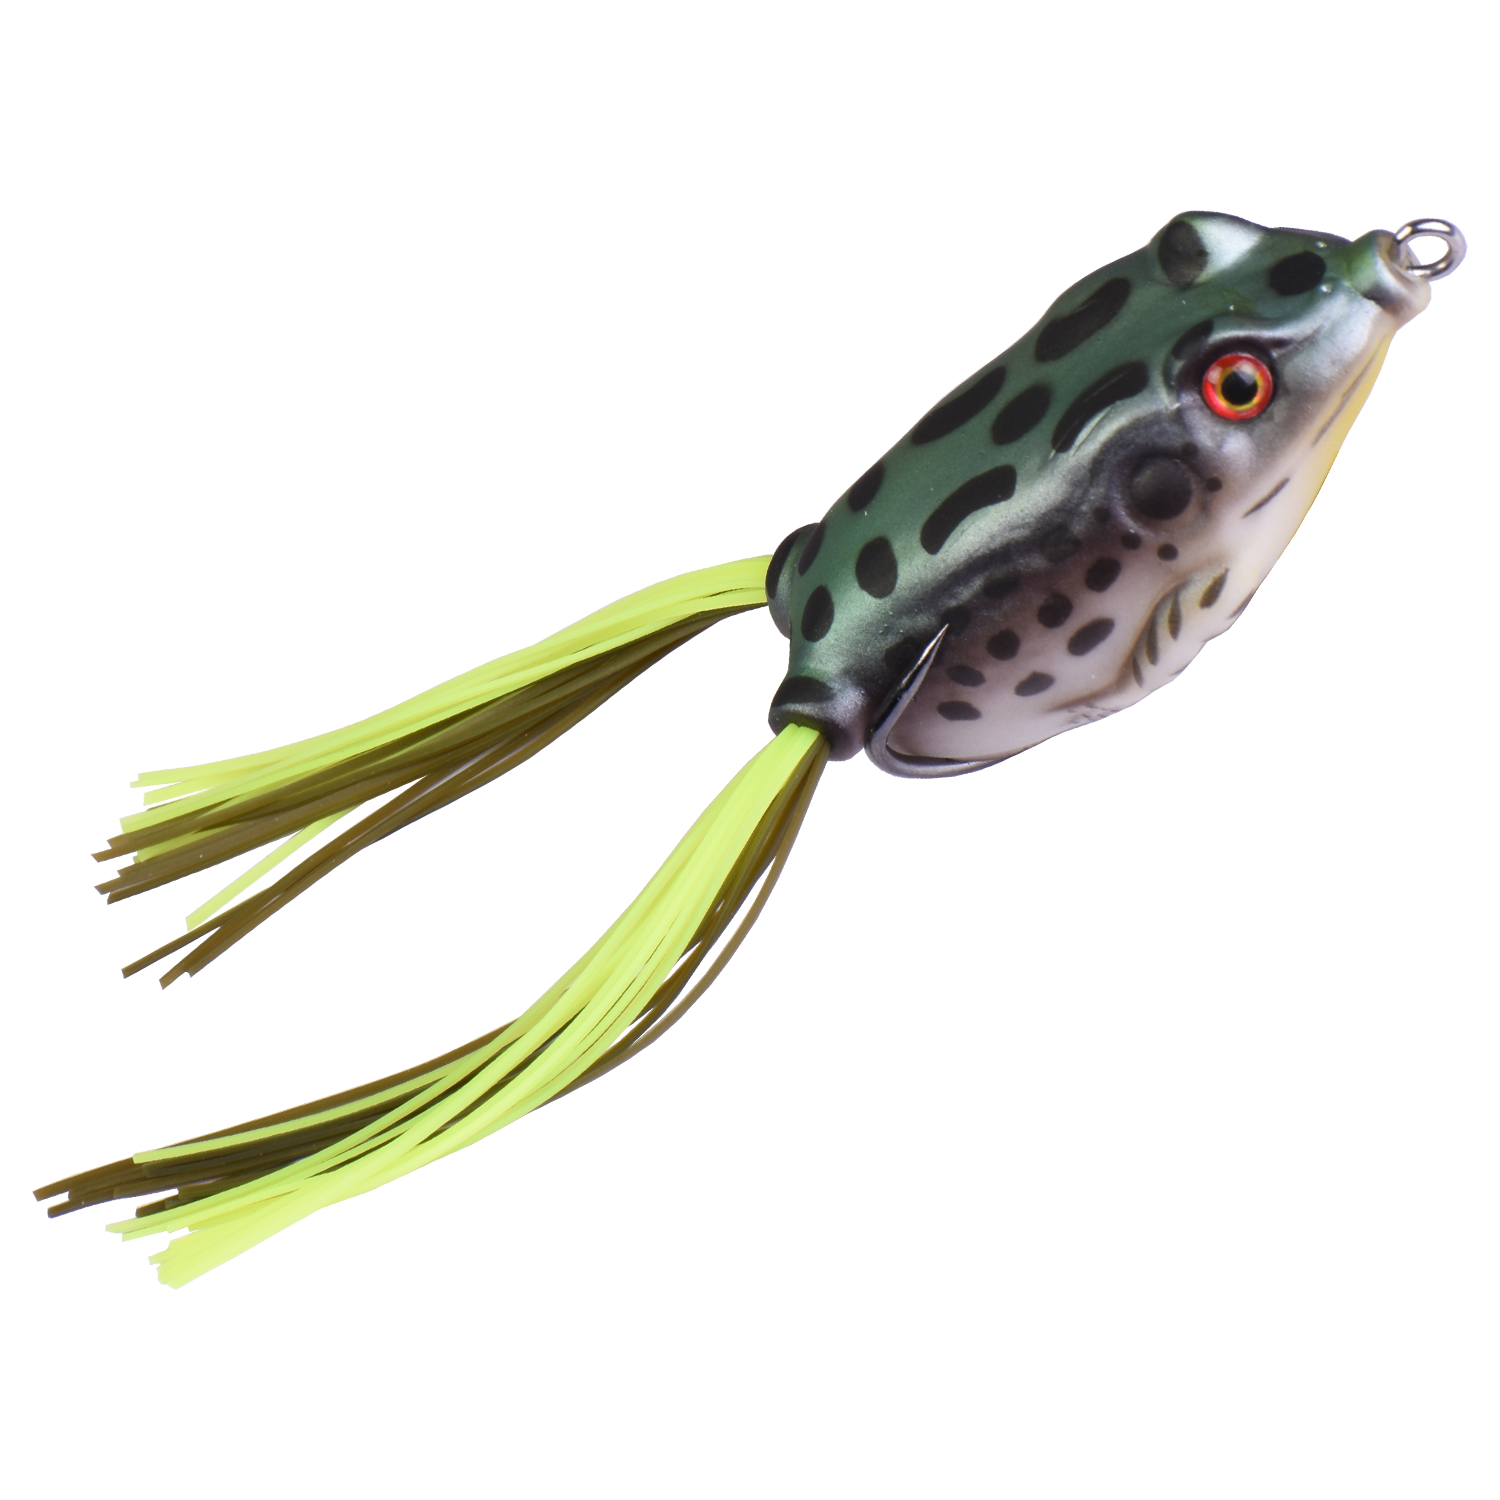 Ourlova Floating Lure Frog Baits With Double Sharp Hooks For Bass Snakehead Salmon Freshwater Other 5.5cm/8g